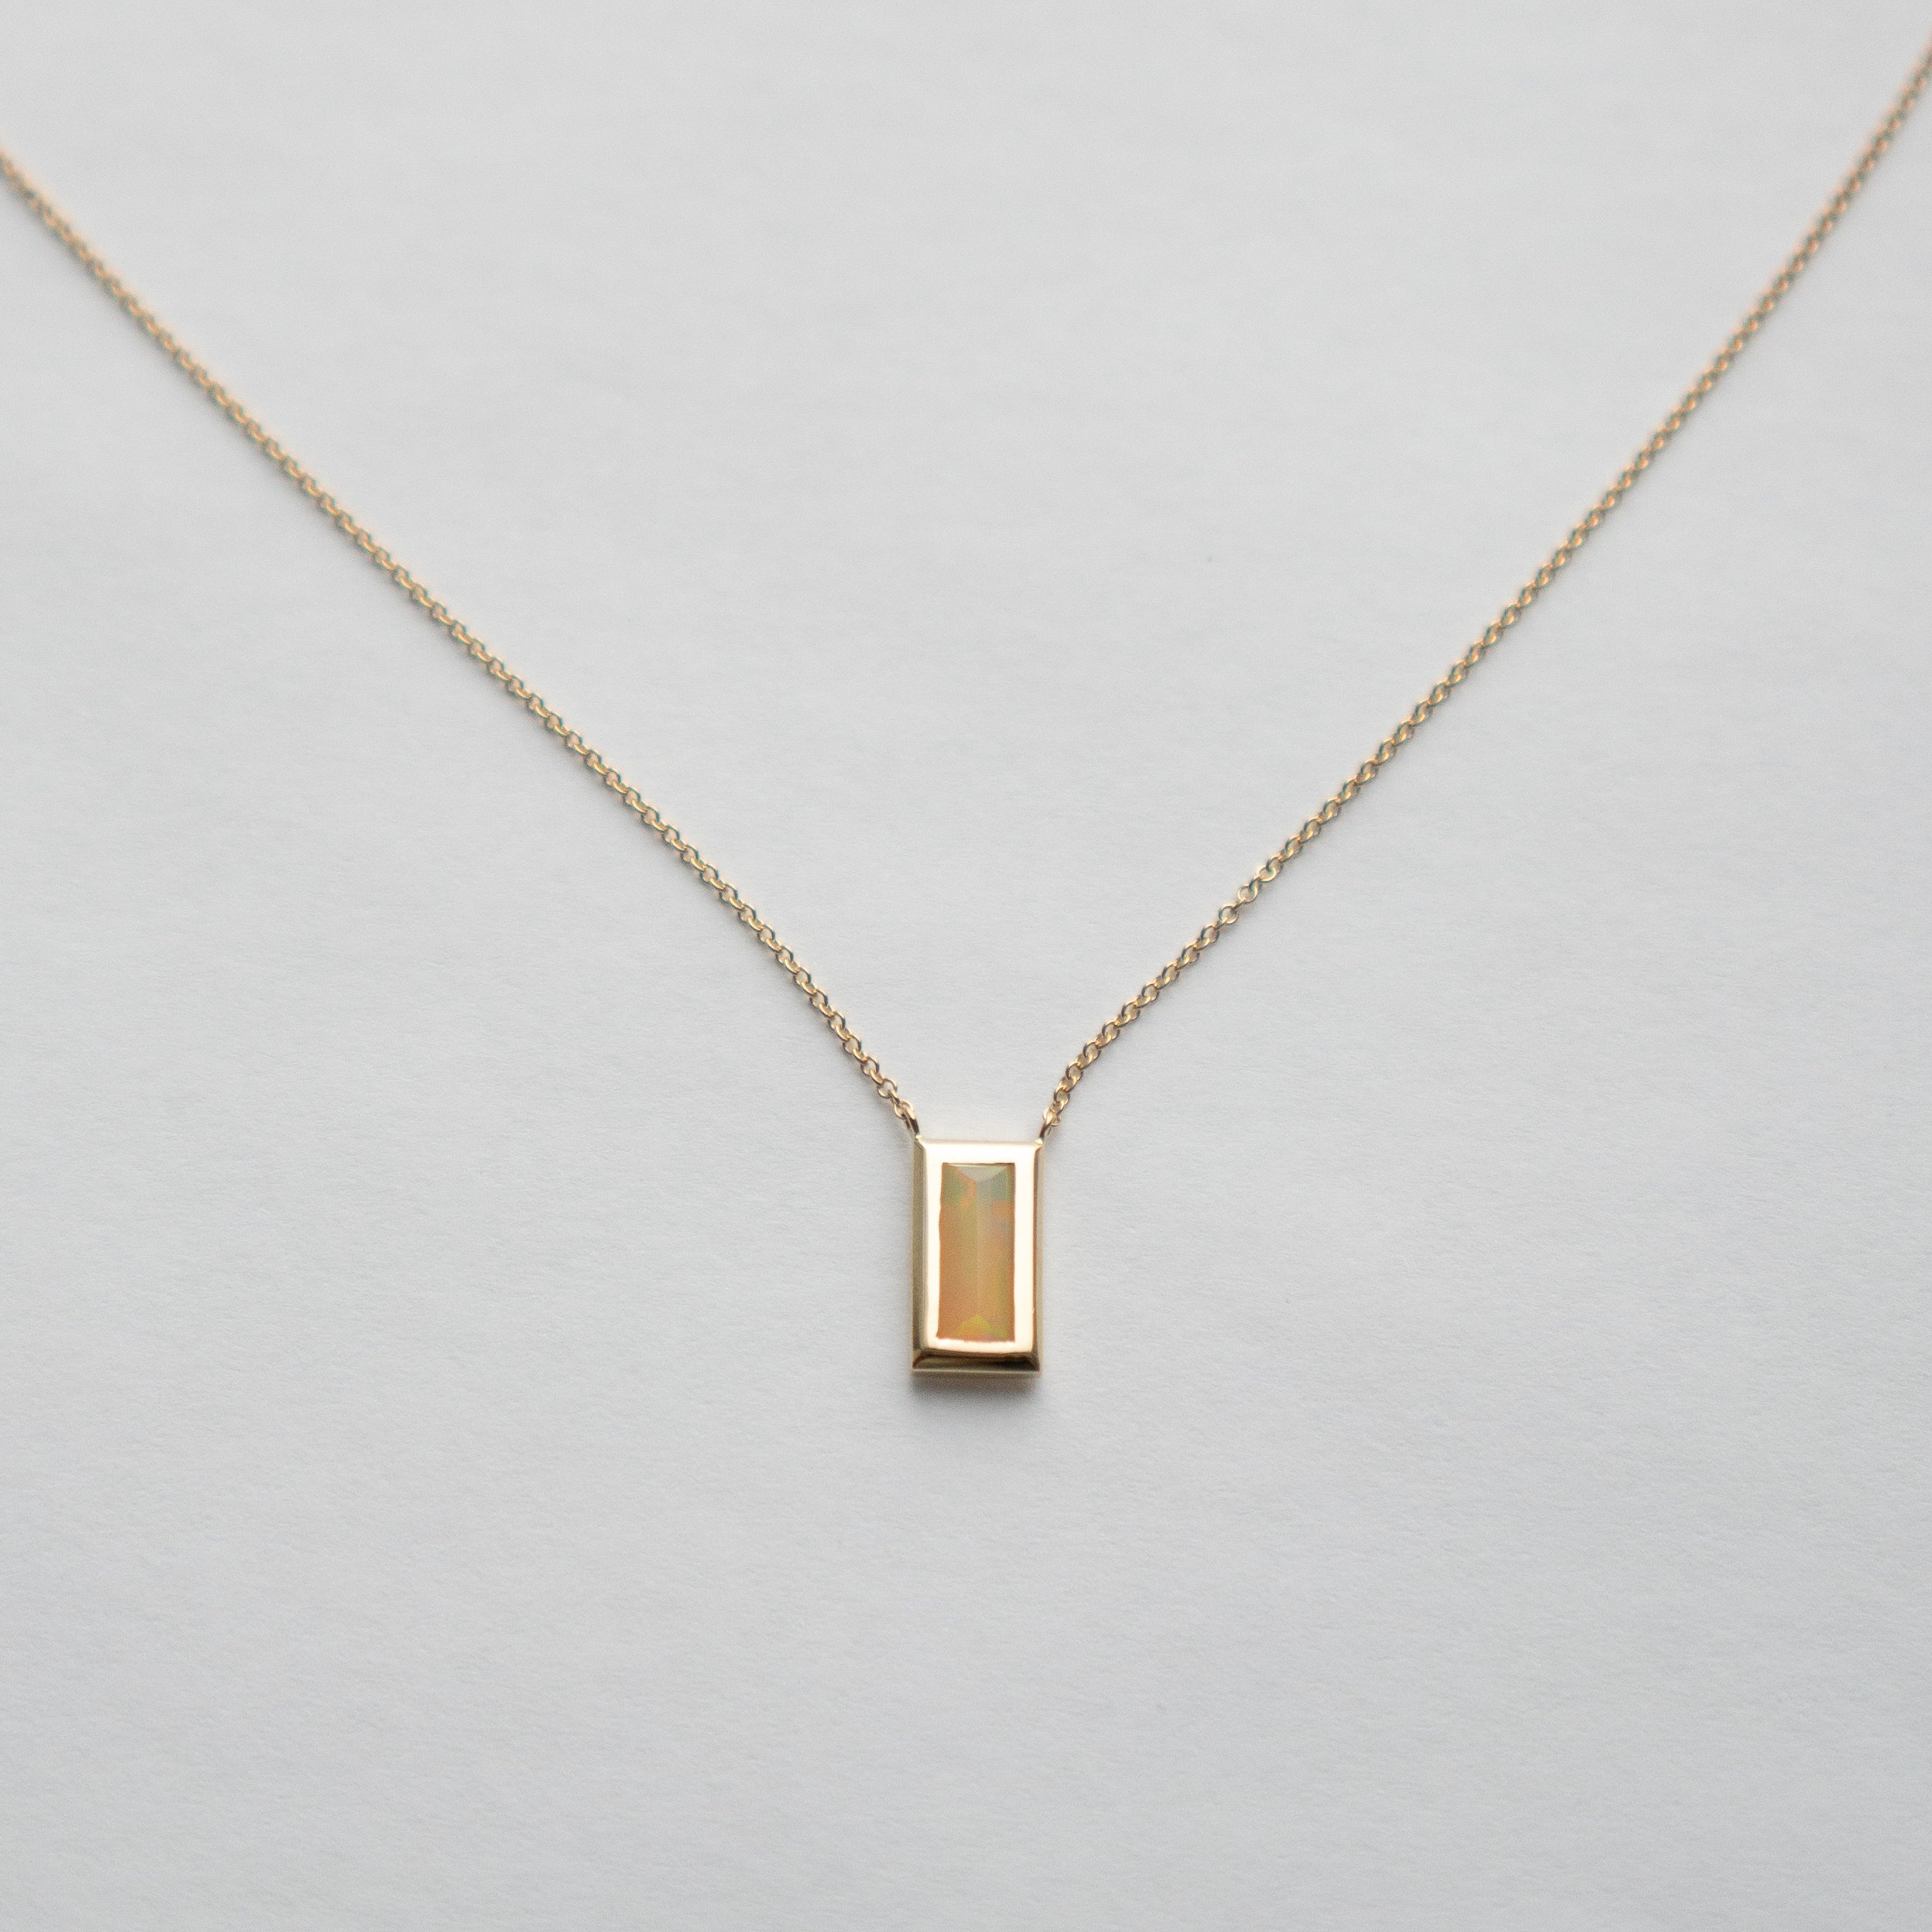 Designer Alia Necklace in 14 karat yellow gold set with baguette cut opal made in NYC by SHW fine Jewelry